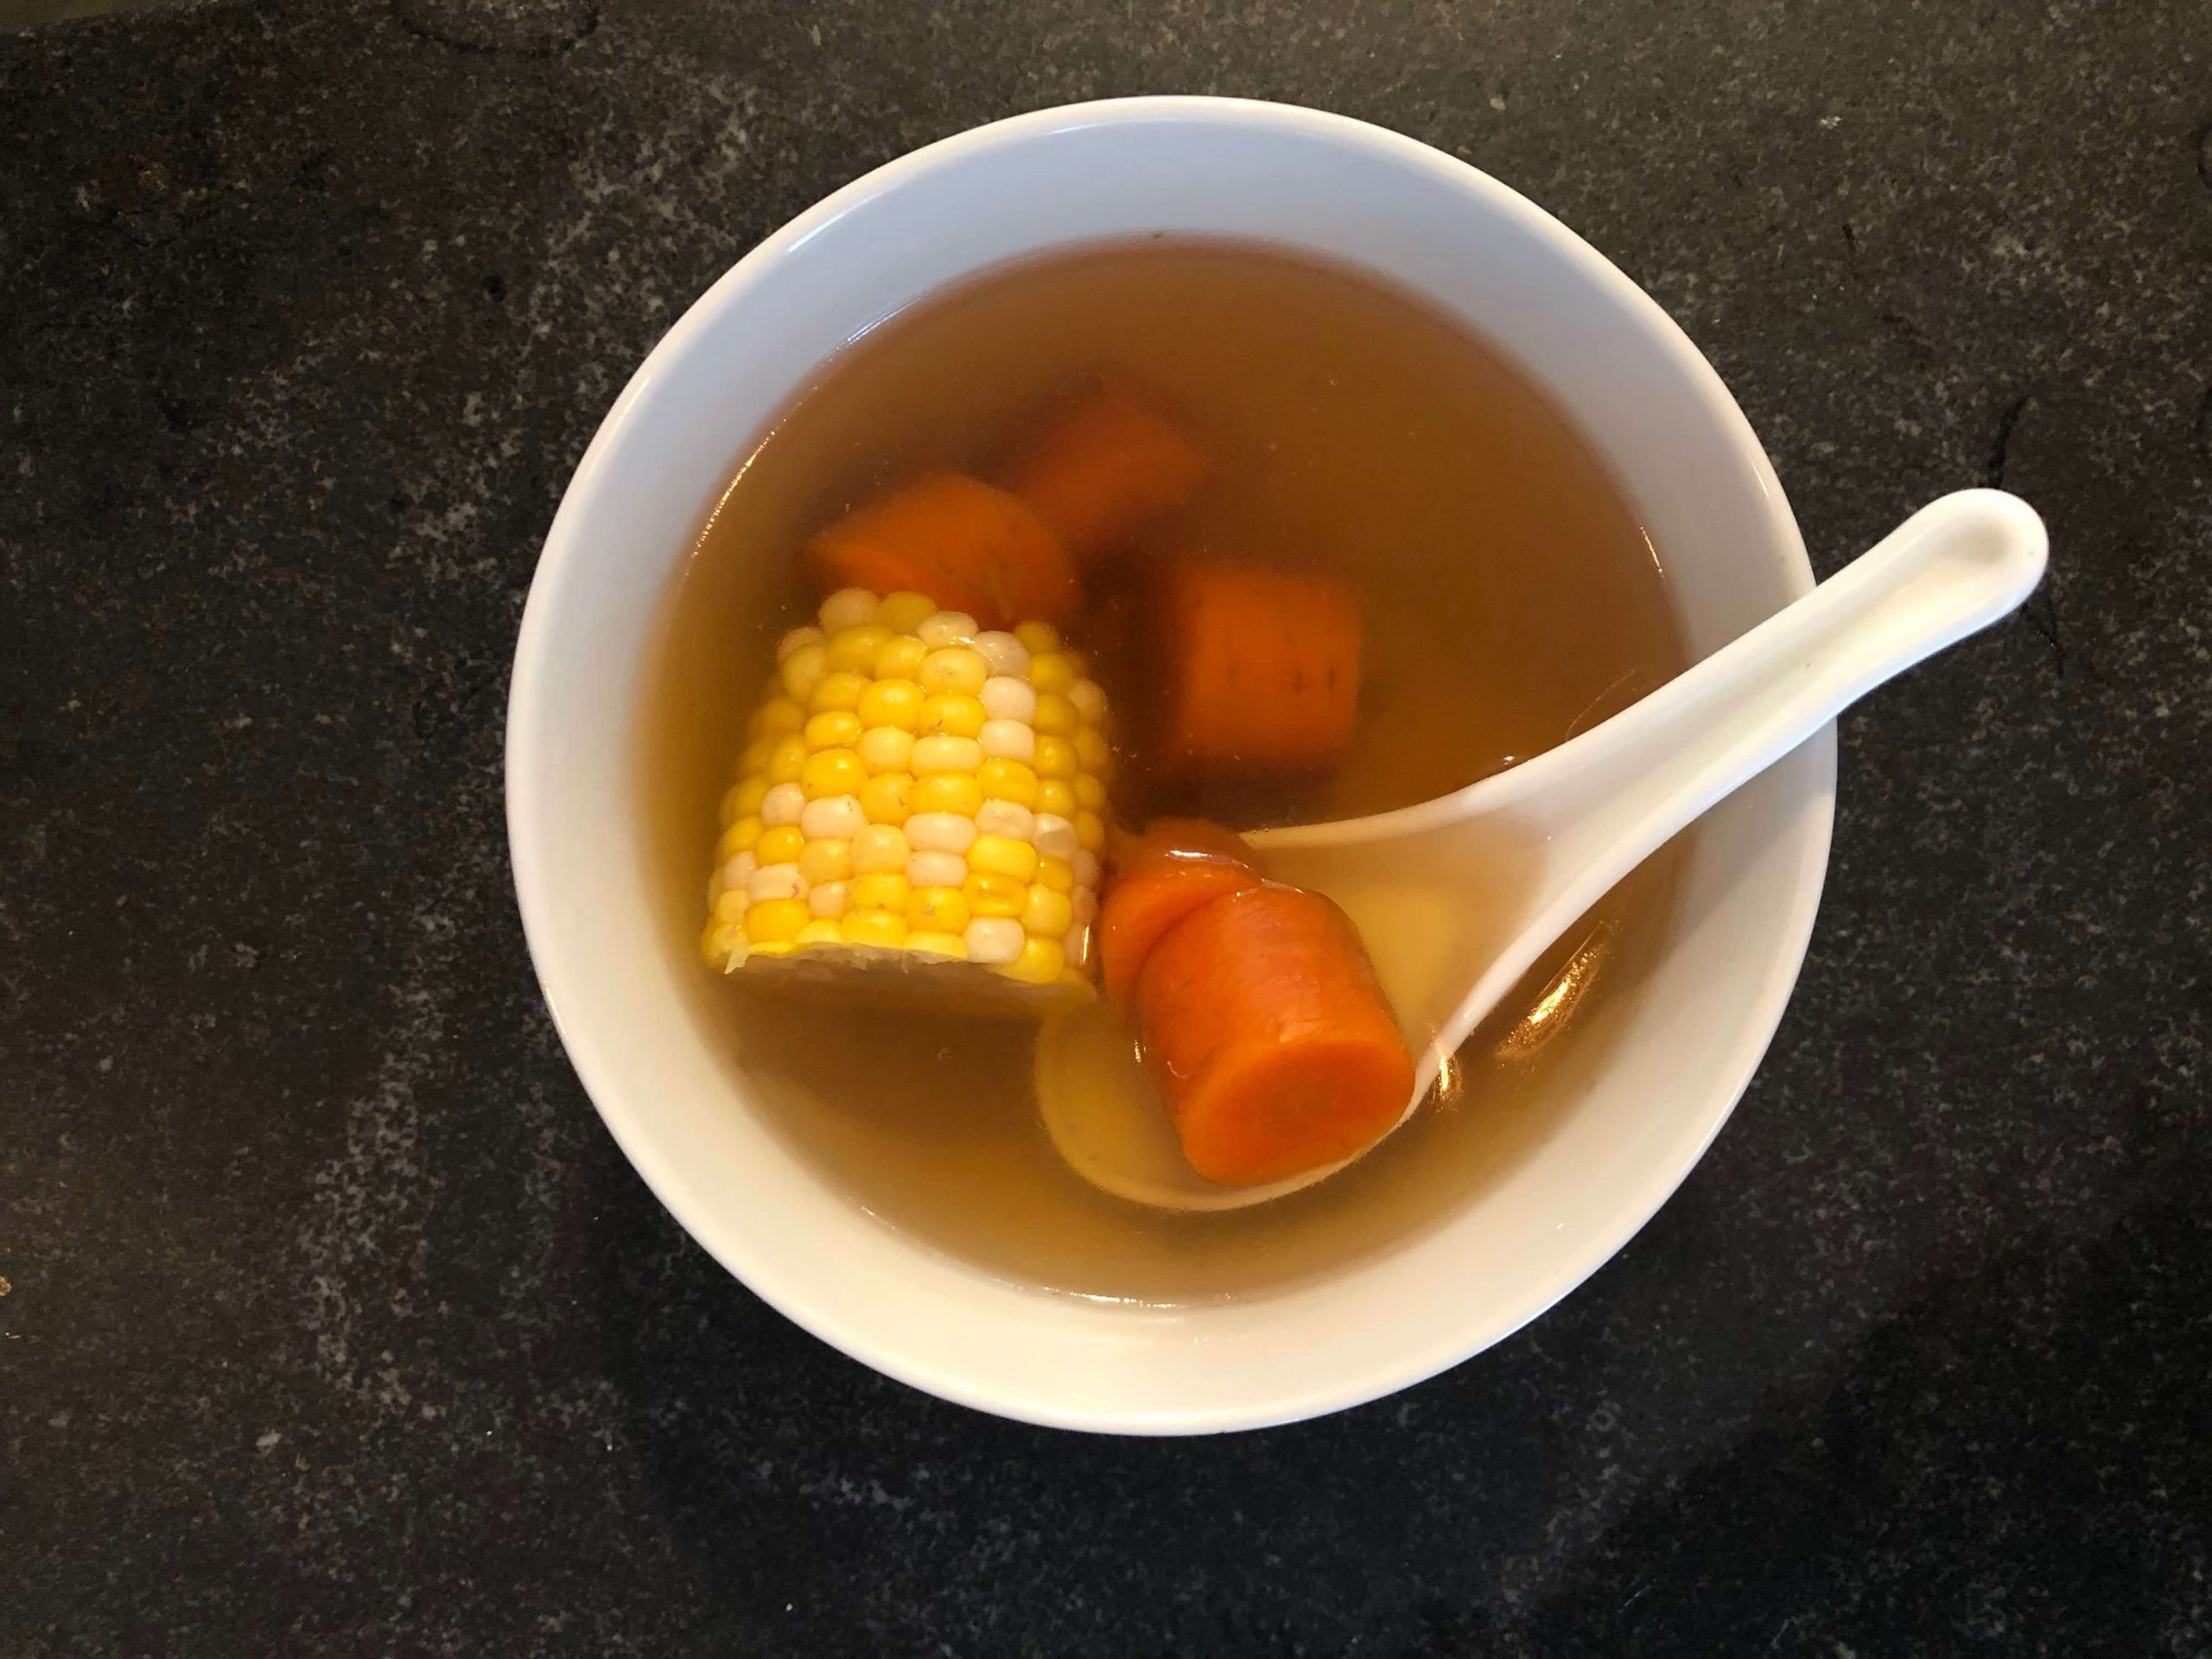 Sweet Carrot and Corn Soup Recipe Cantonese Style